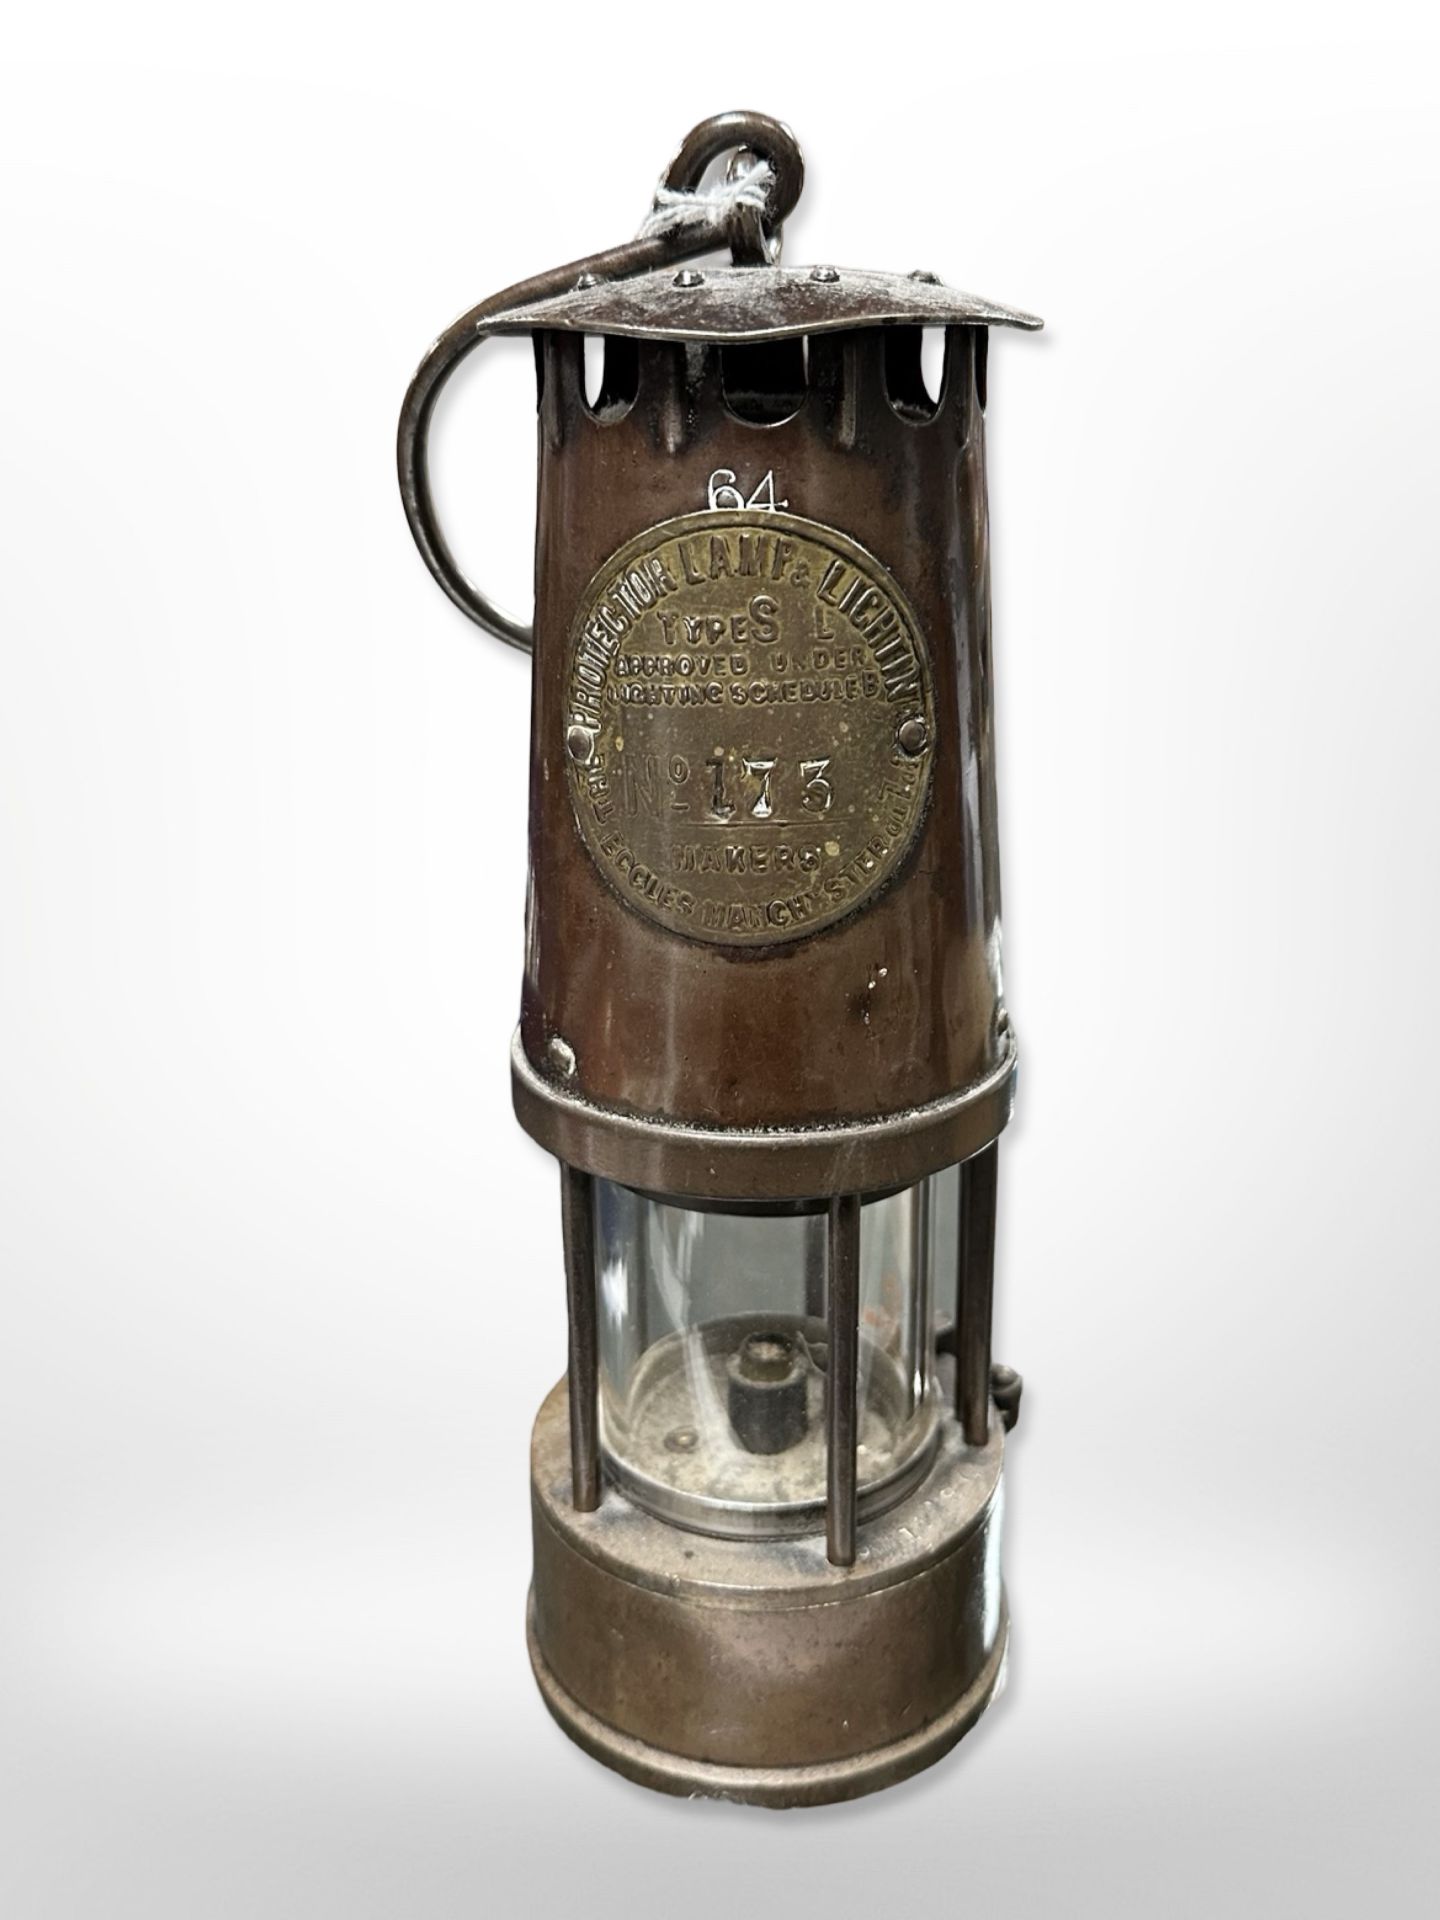 An Eccles protector miner's lamp type SL.